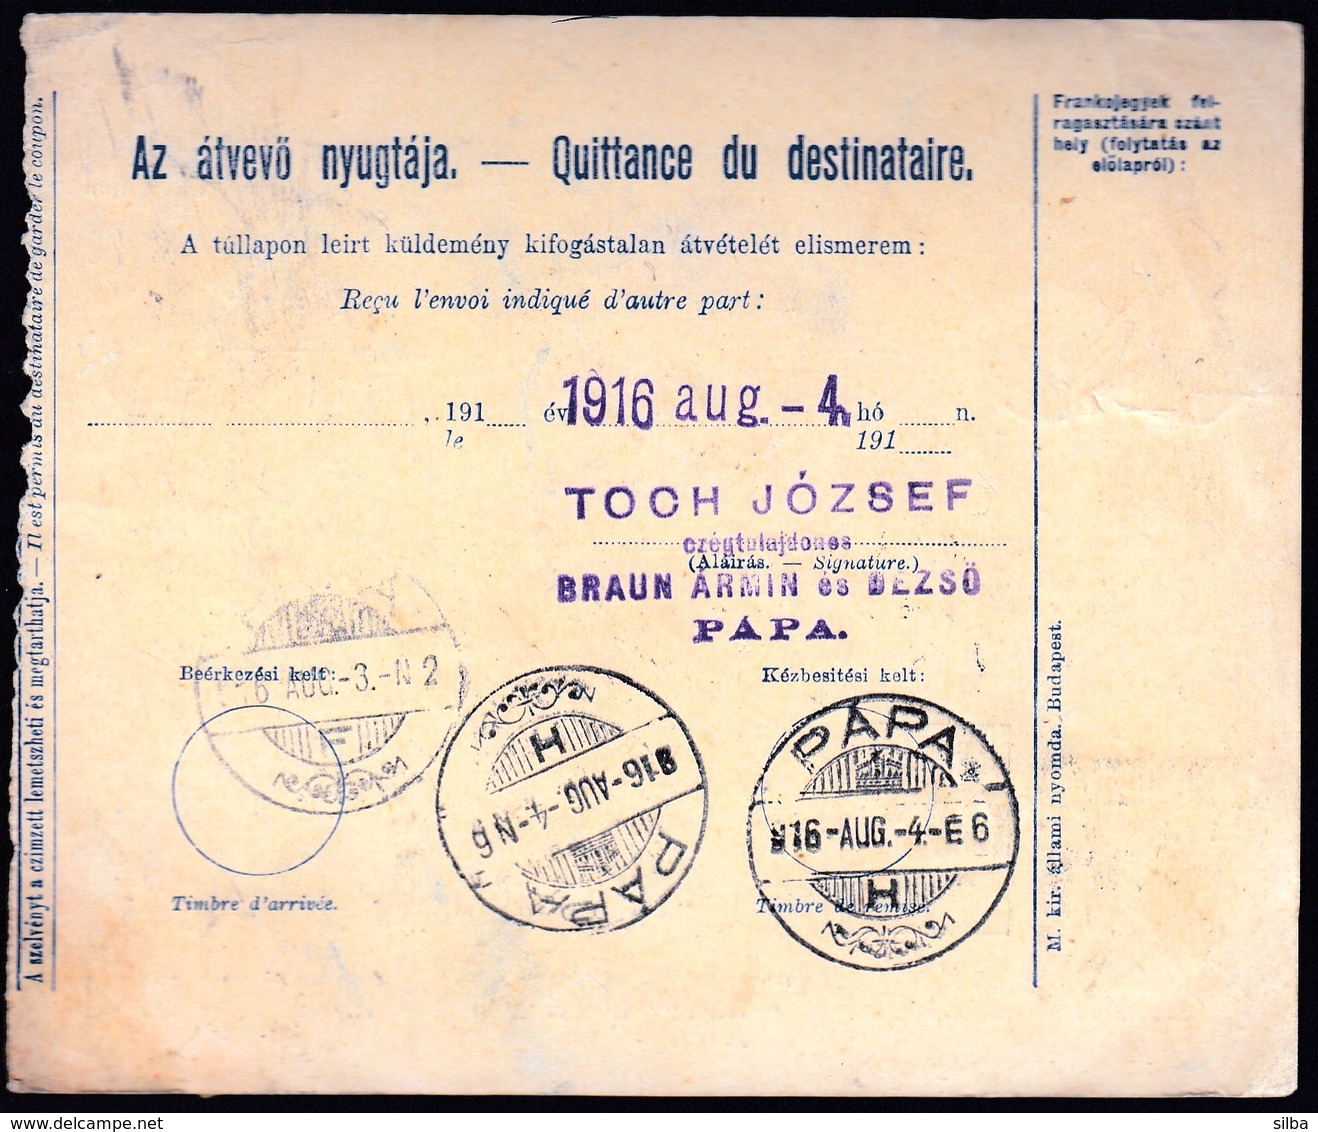 Hungary Budapest 1916 / Parcel Post, Postai Szallitolevel, Bulletin D' Expedition / To Papa - Parcel Post